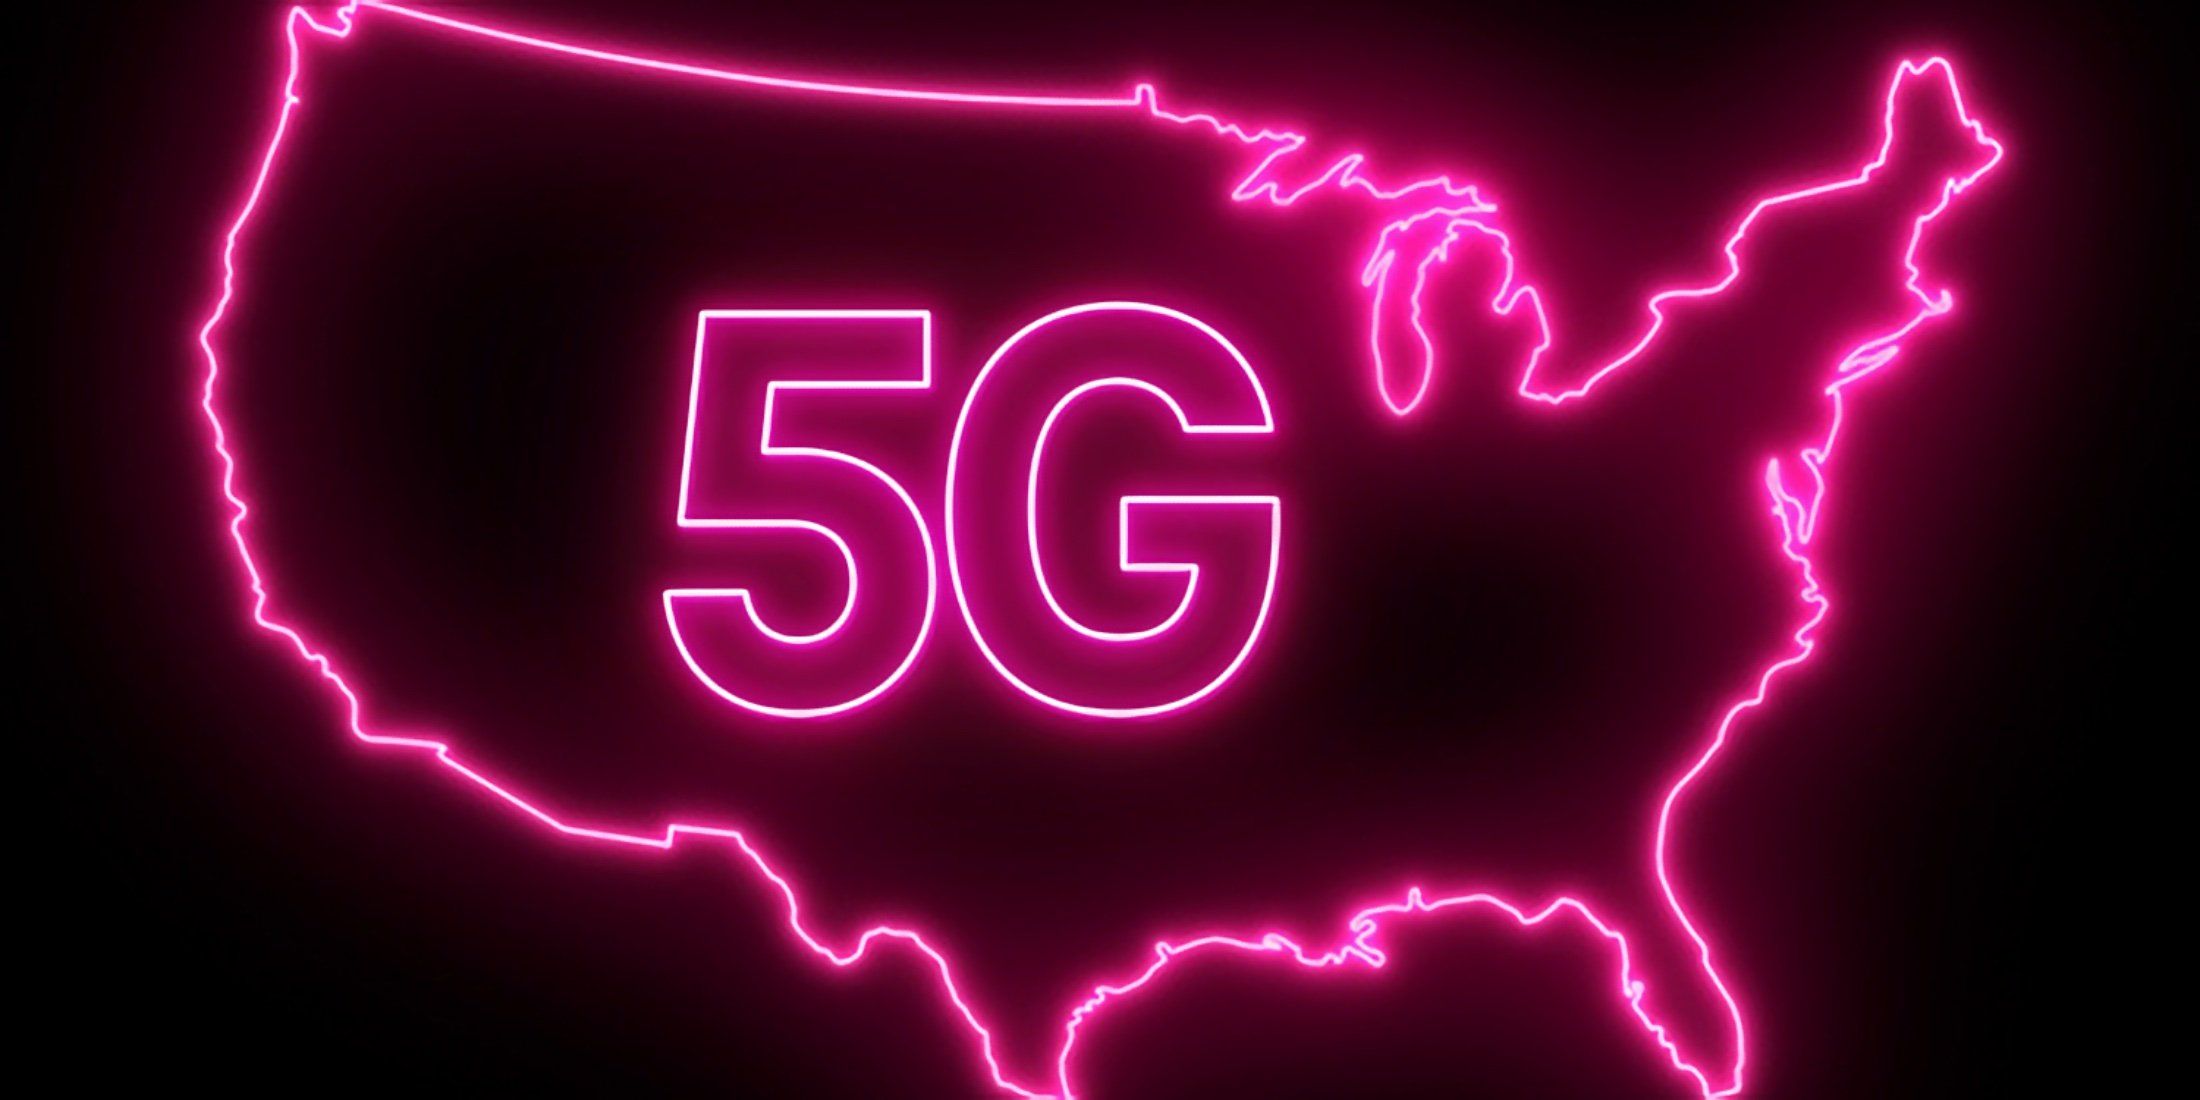 New T-Mobile Rule Limits Where You Can Use Their 5G What This Means for Your Internet Freedom